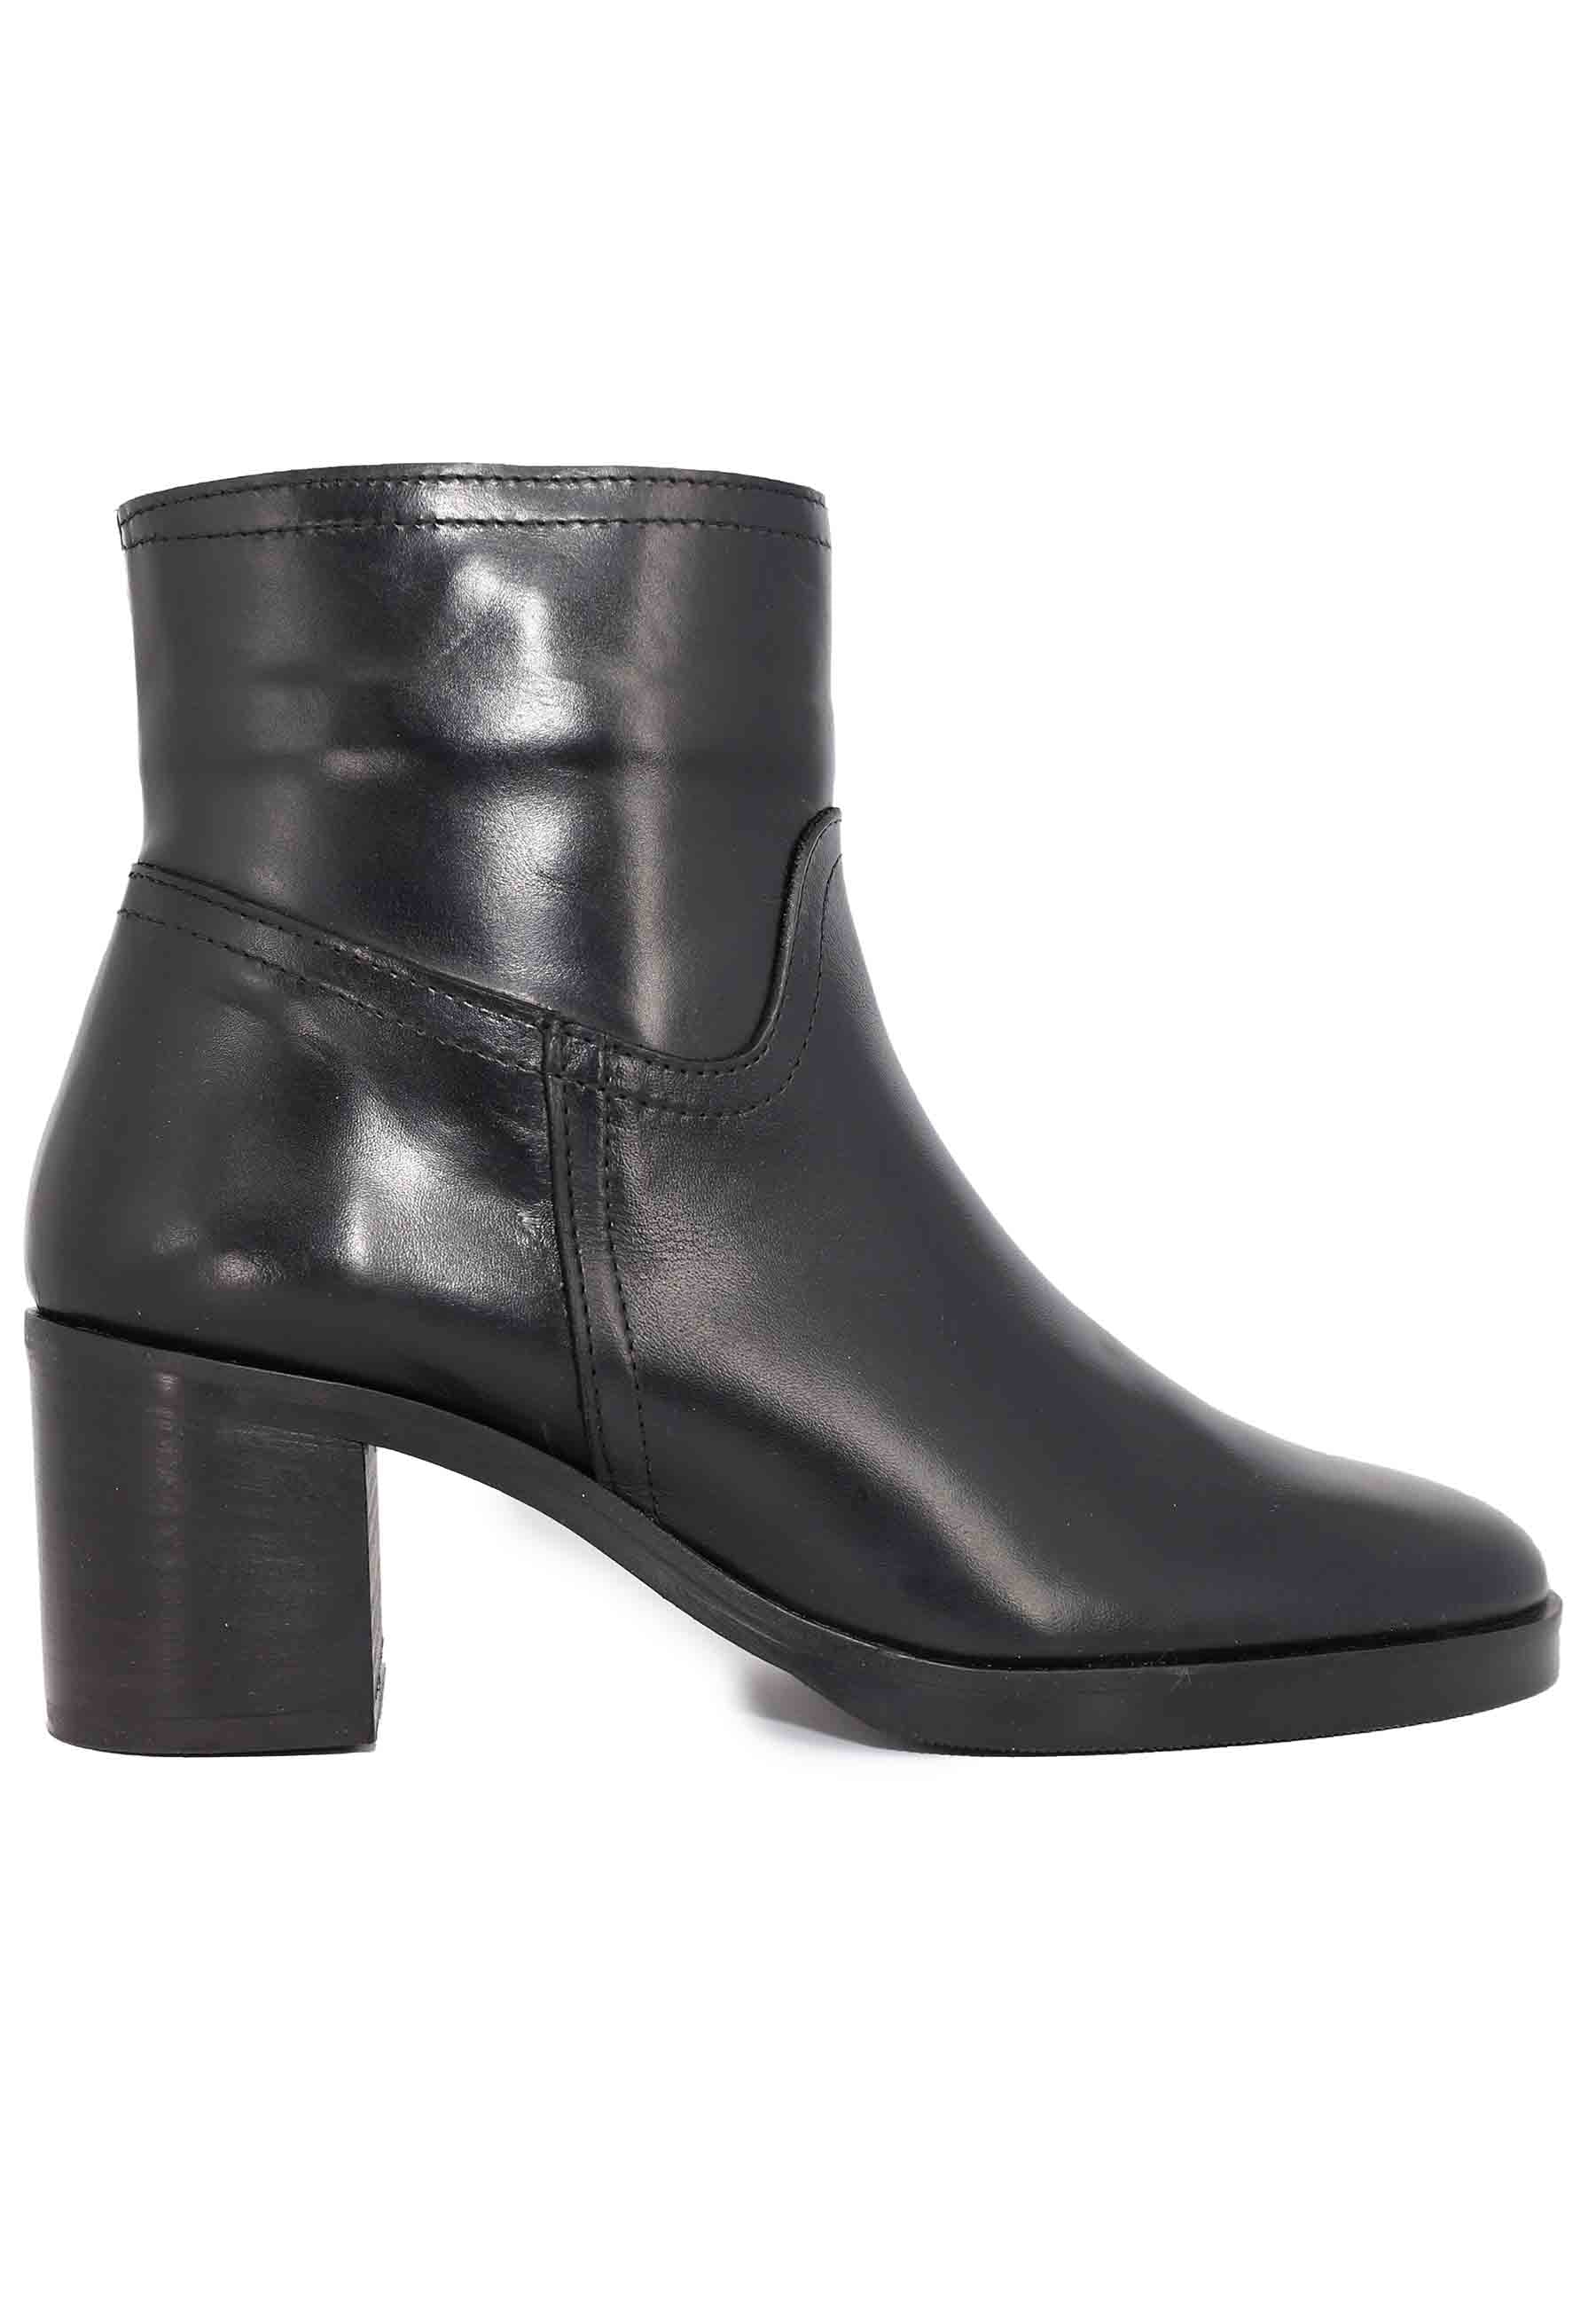 Women's black leather ankle boots with heel and rubber sole